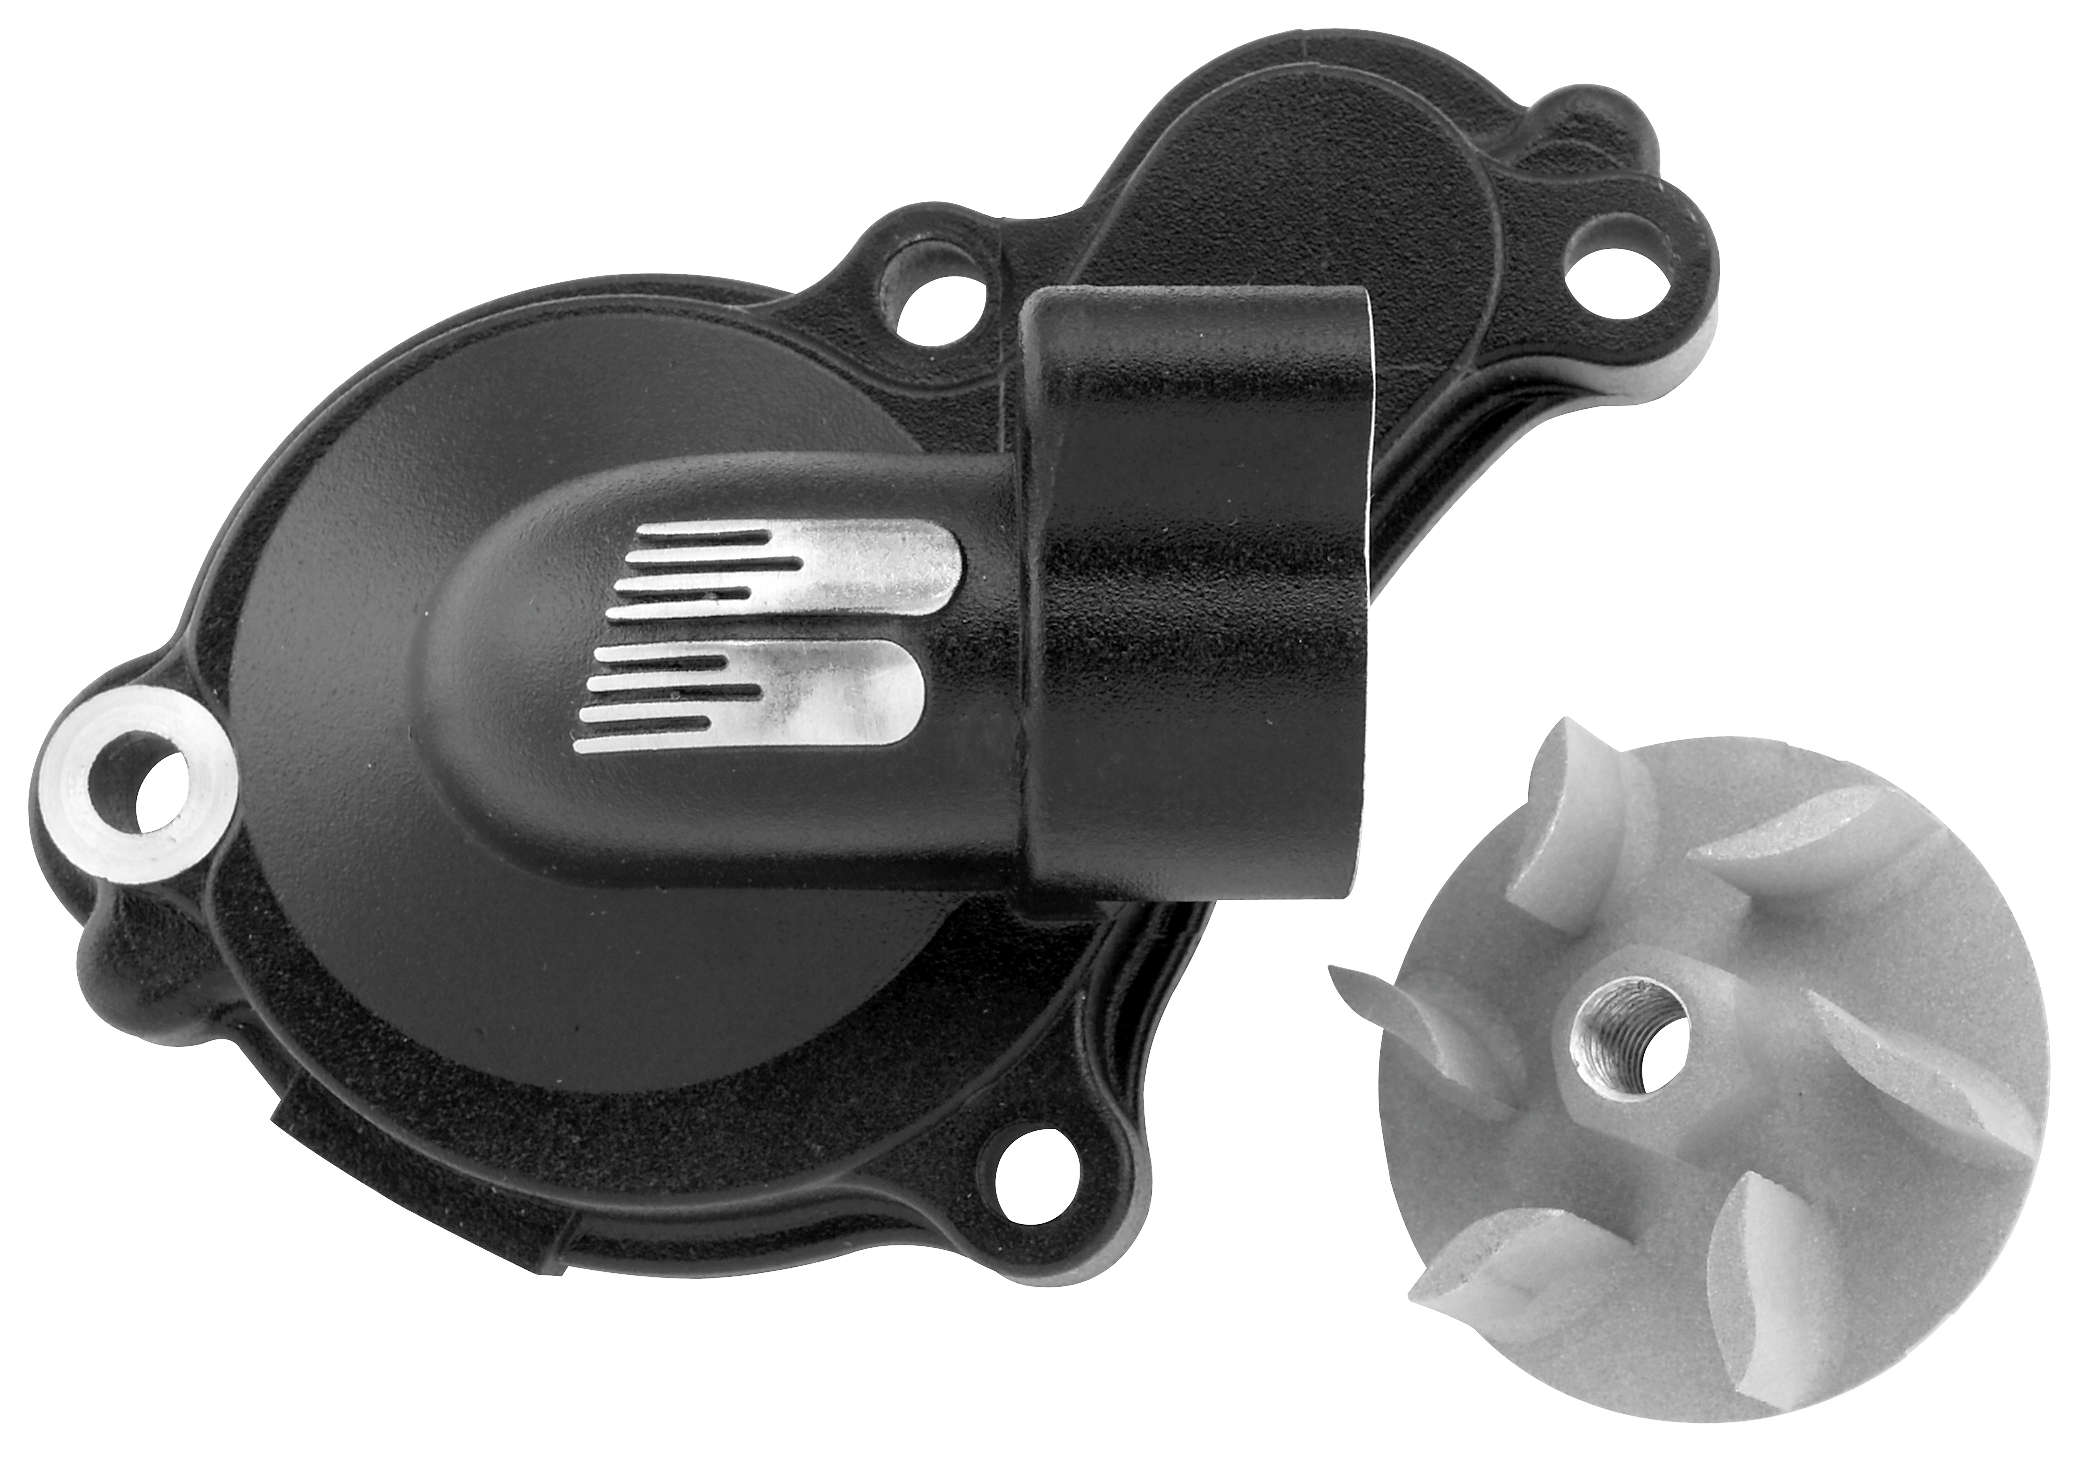 Waterpump Cover Impeller Kit - Black - For 00-09 Yamaha YZ426 / YZ450F & 00-15 WR426 / WR450F - Click Image to Close